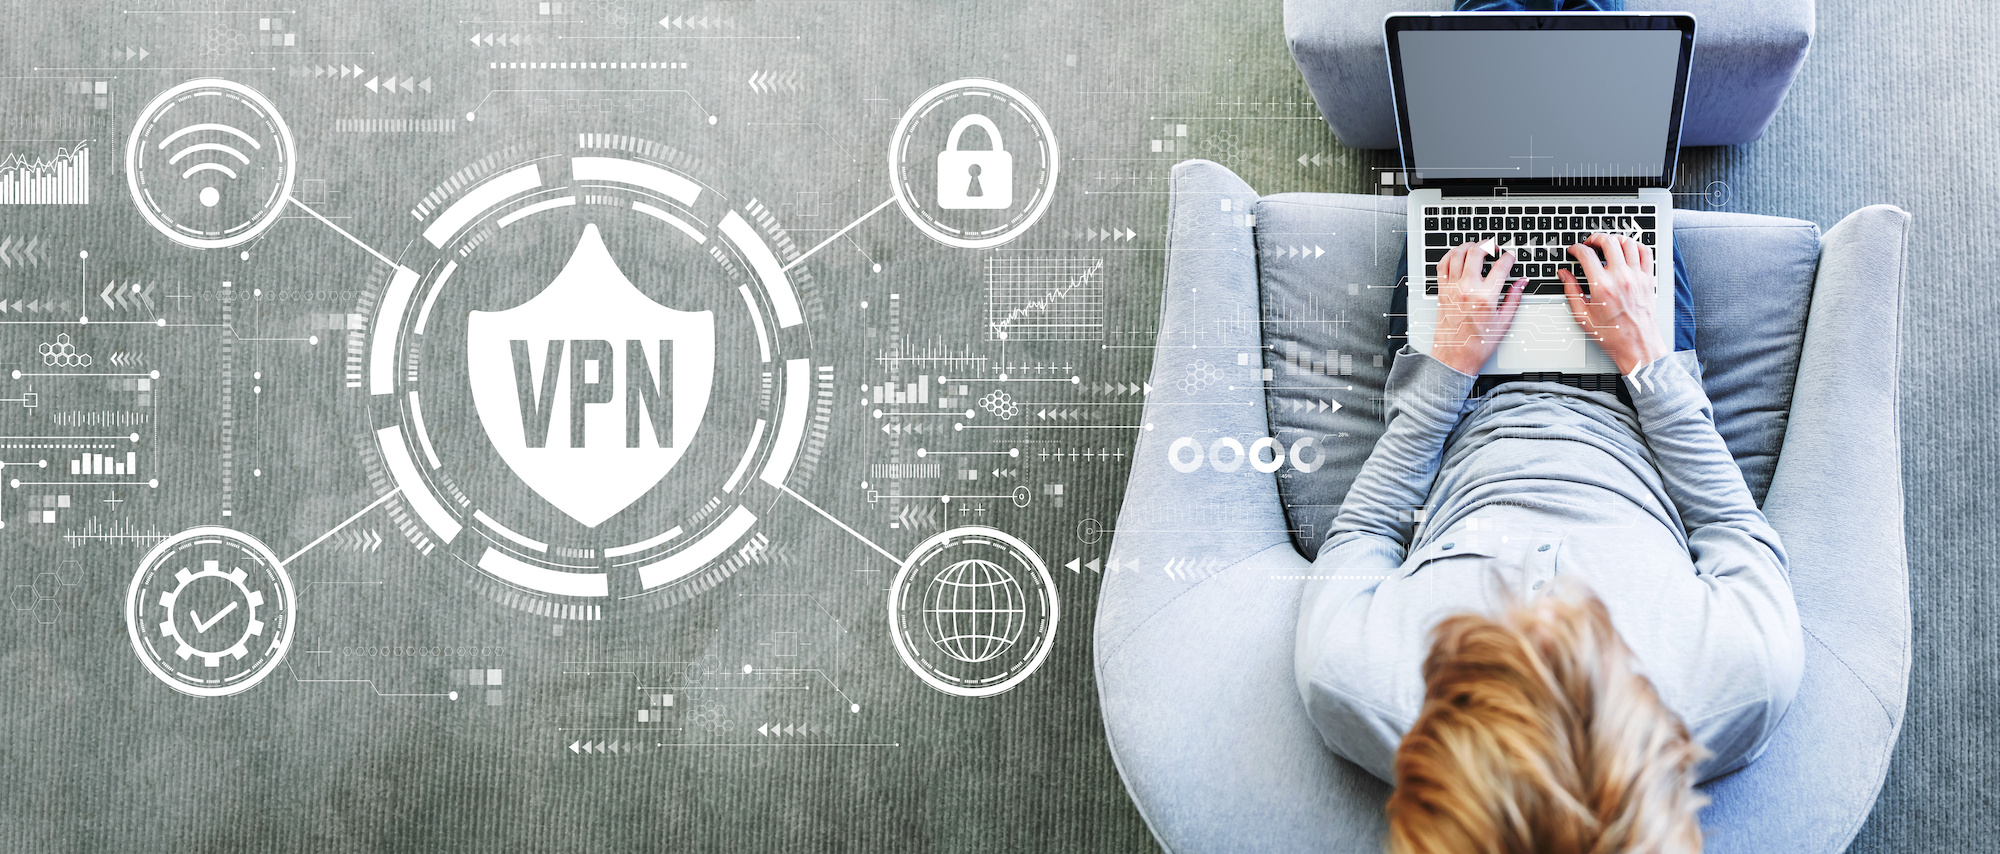 Things You Didn’t Know About VPNs